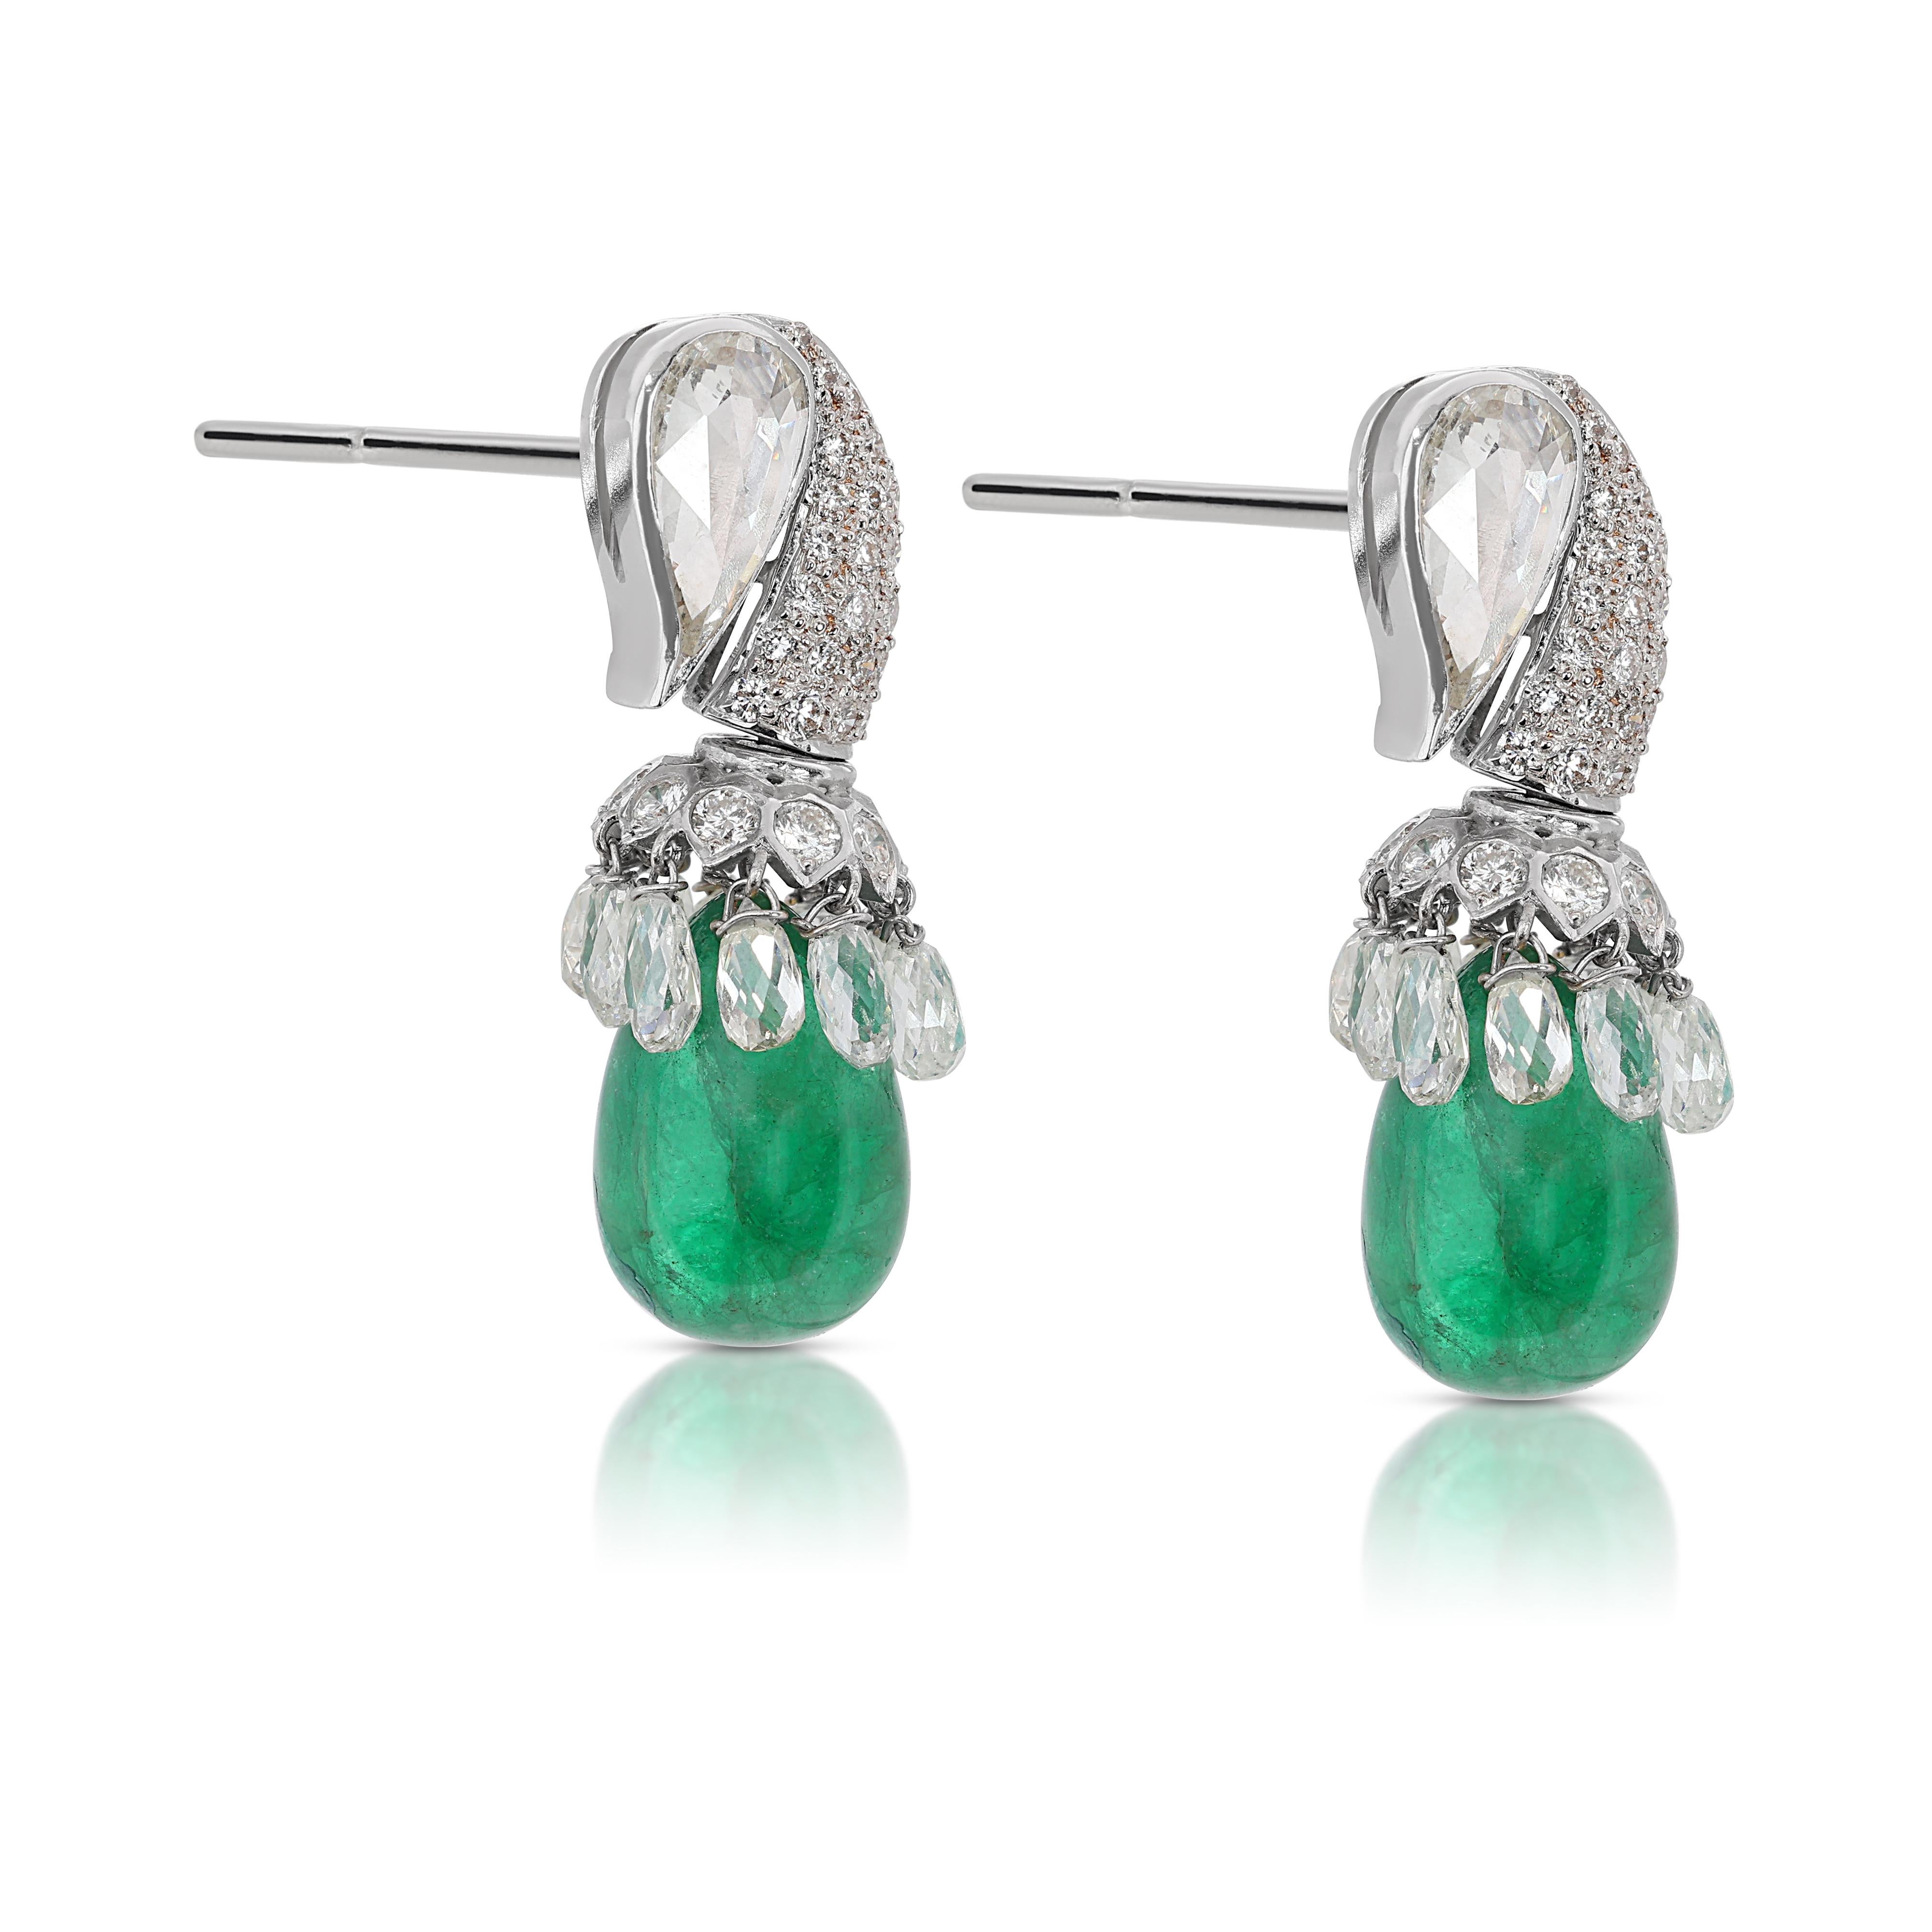 Pear Cut Gorgeous 24.31ct Green Emerald Teardrop Earrings with Diamonds in 18K White Gold For Sale